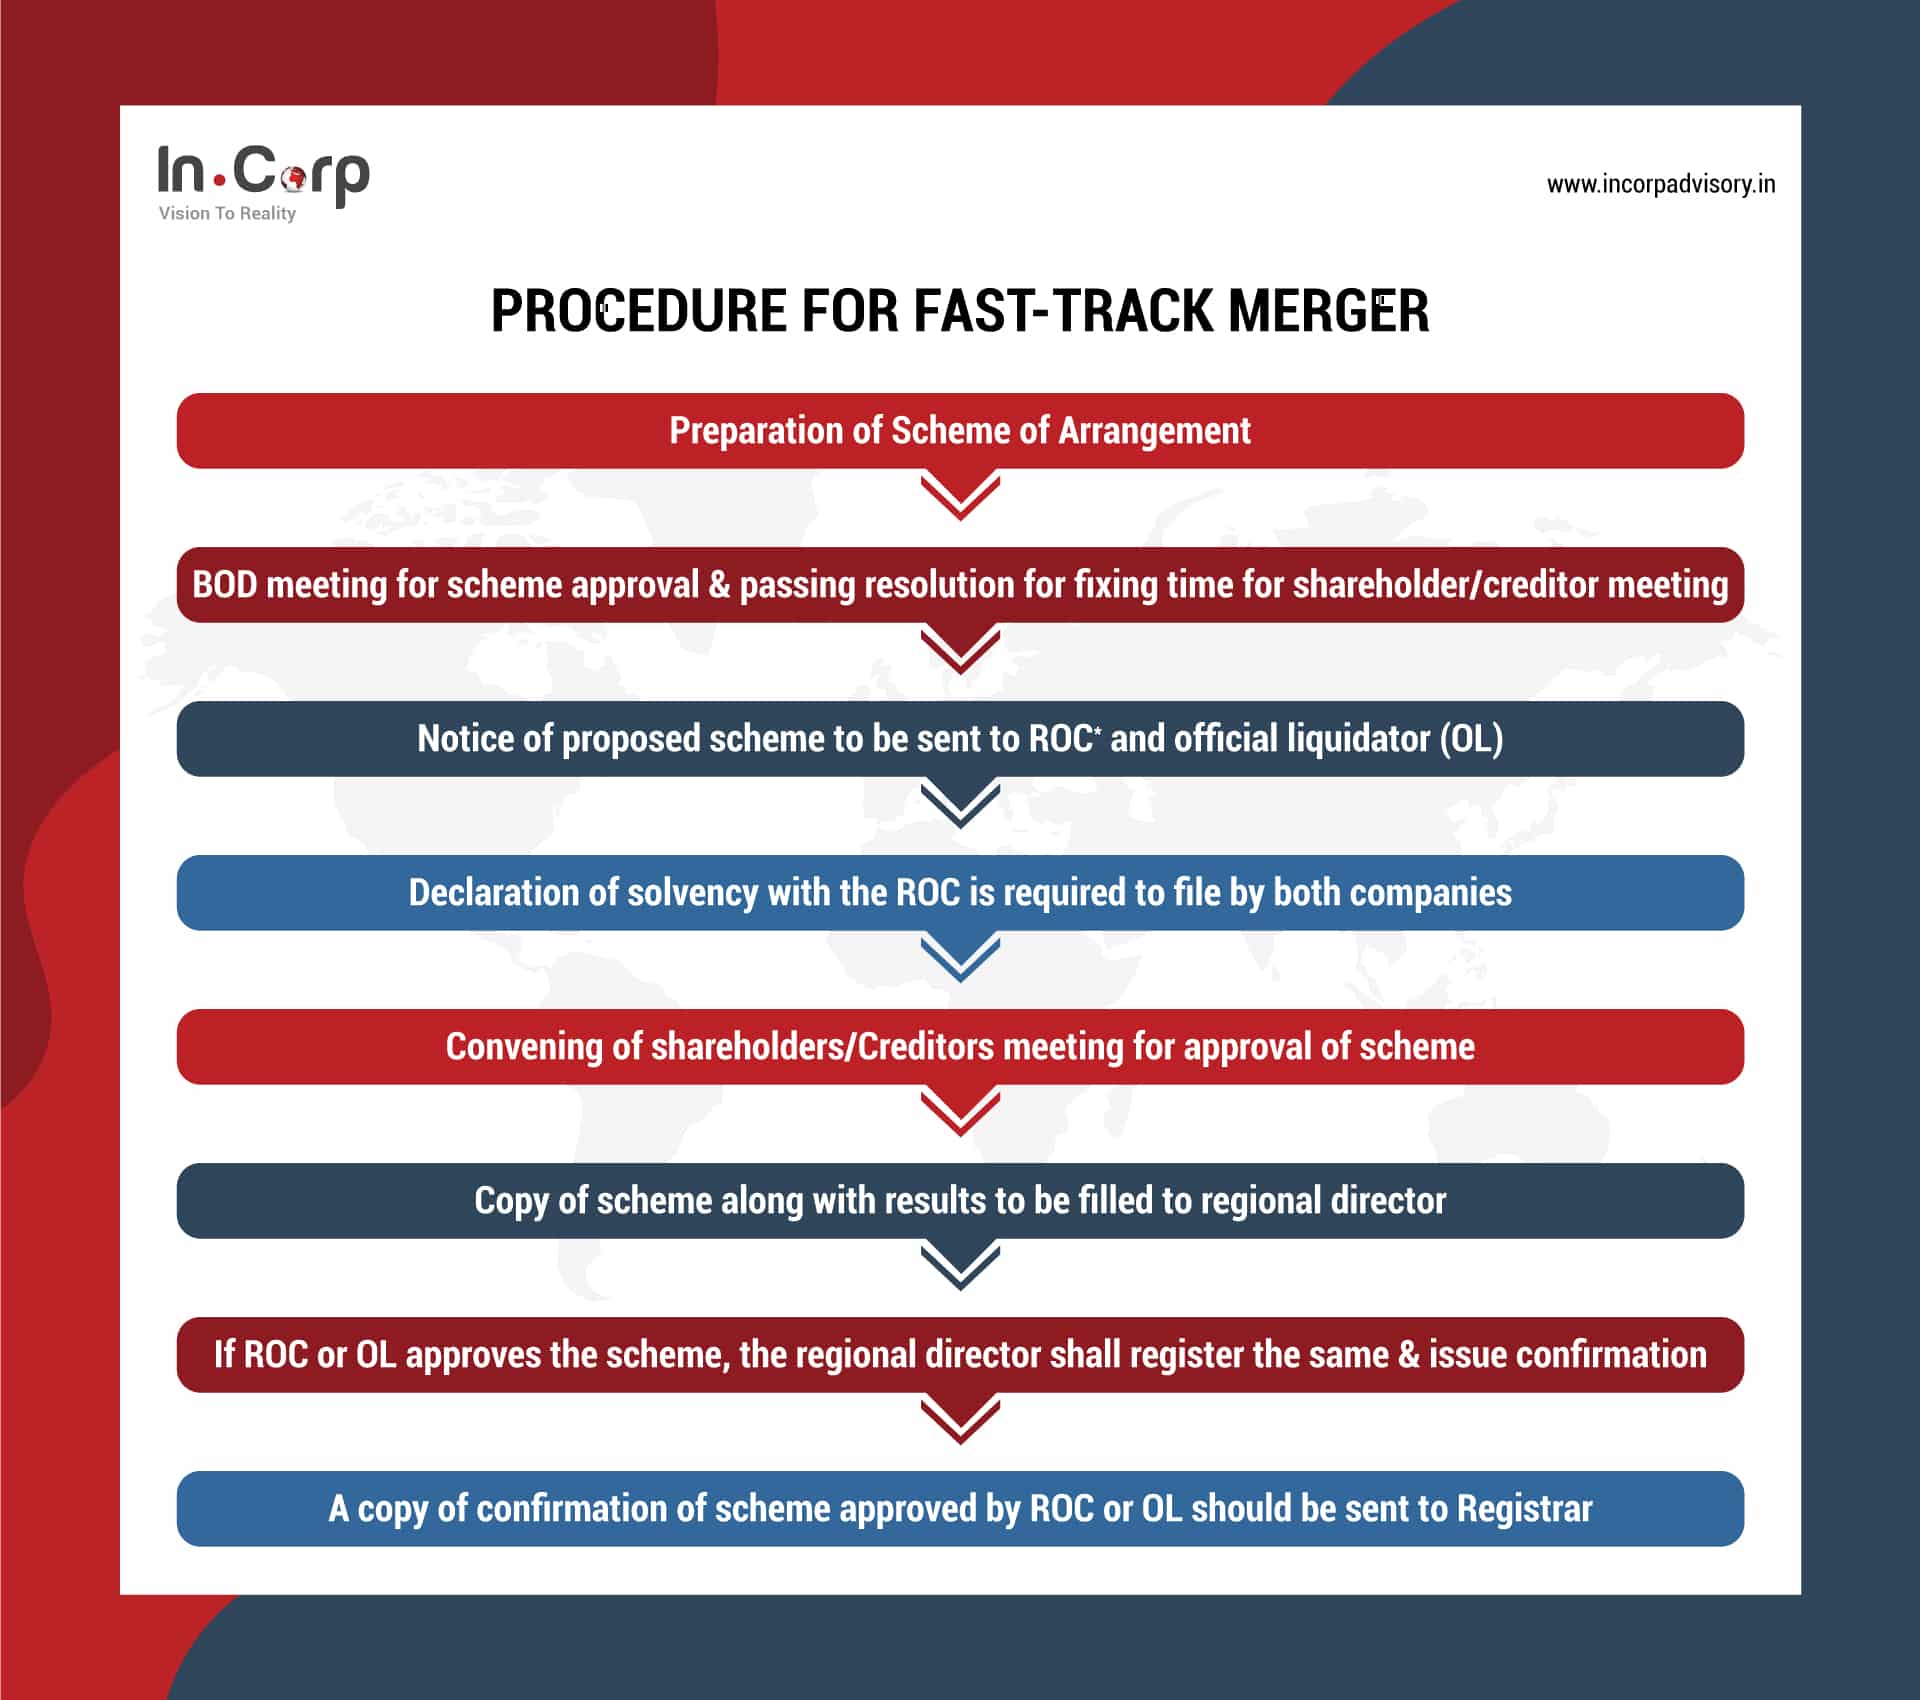 Procedure for fast-track merger